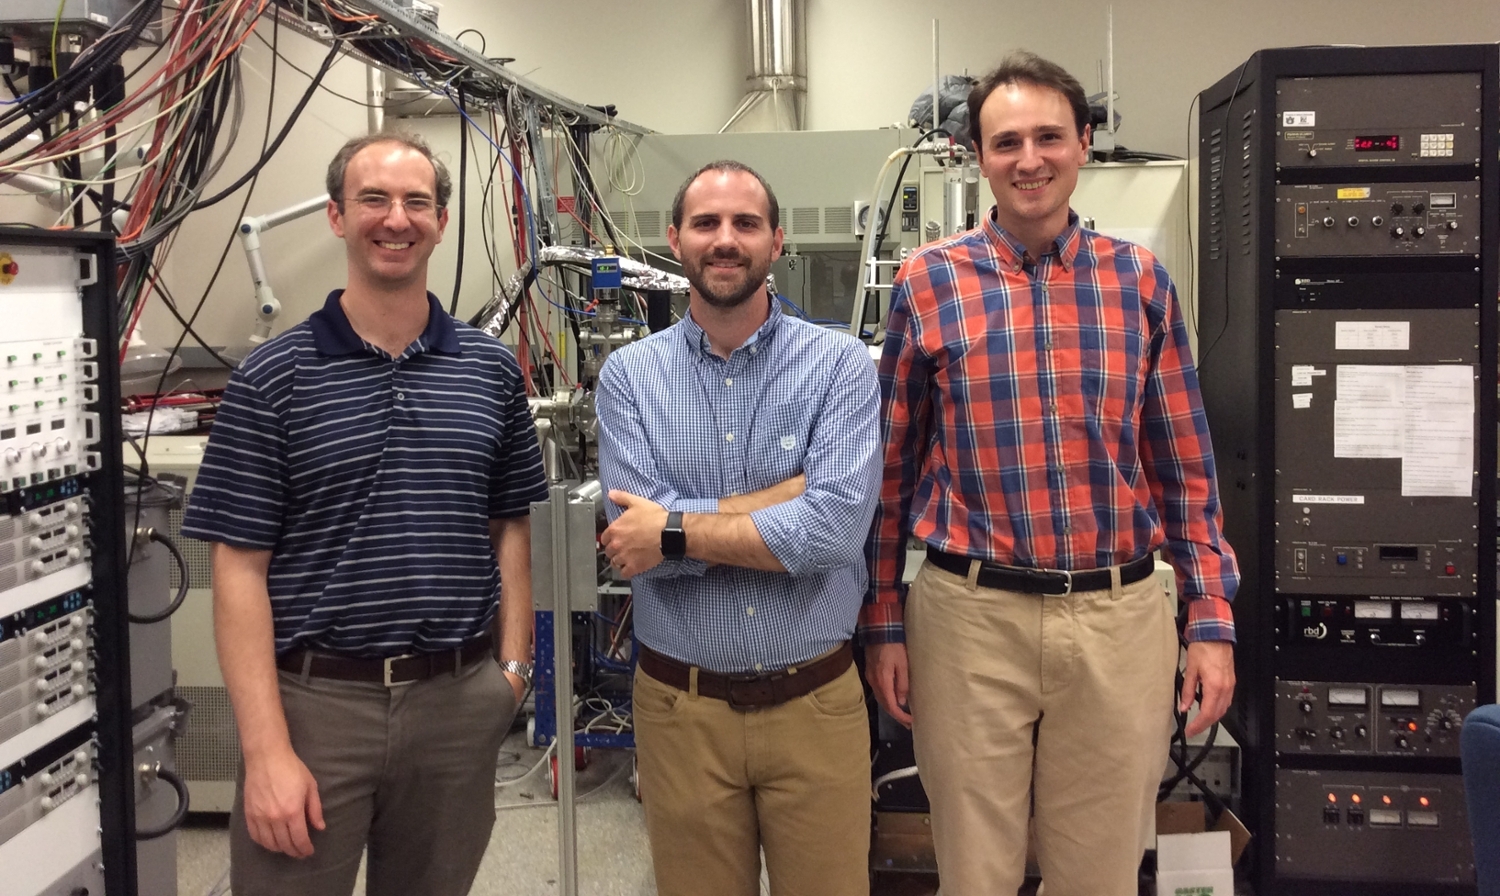 COSAM Physics and Chemistry Faculty Awarded $530,000 National Science Foundation Grant to Research Oxide Materials Relevant to Fuel Cell Technology